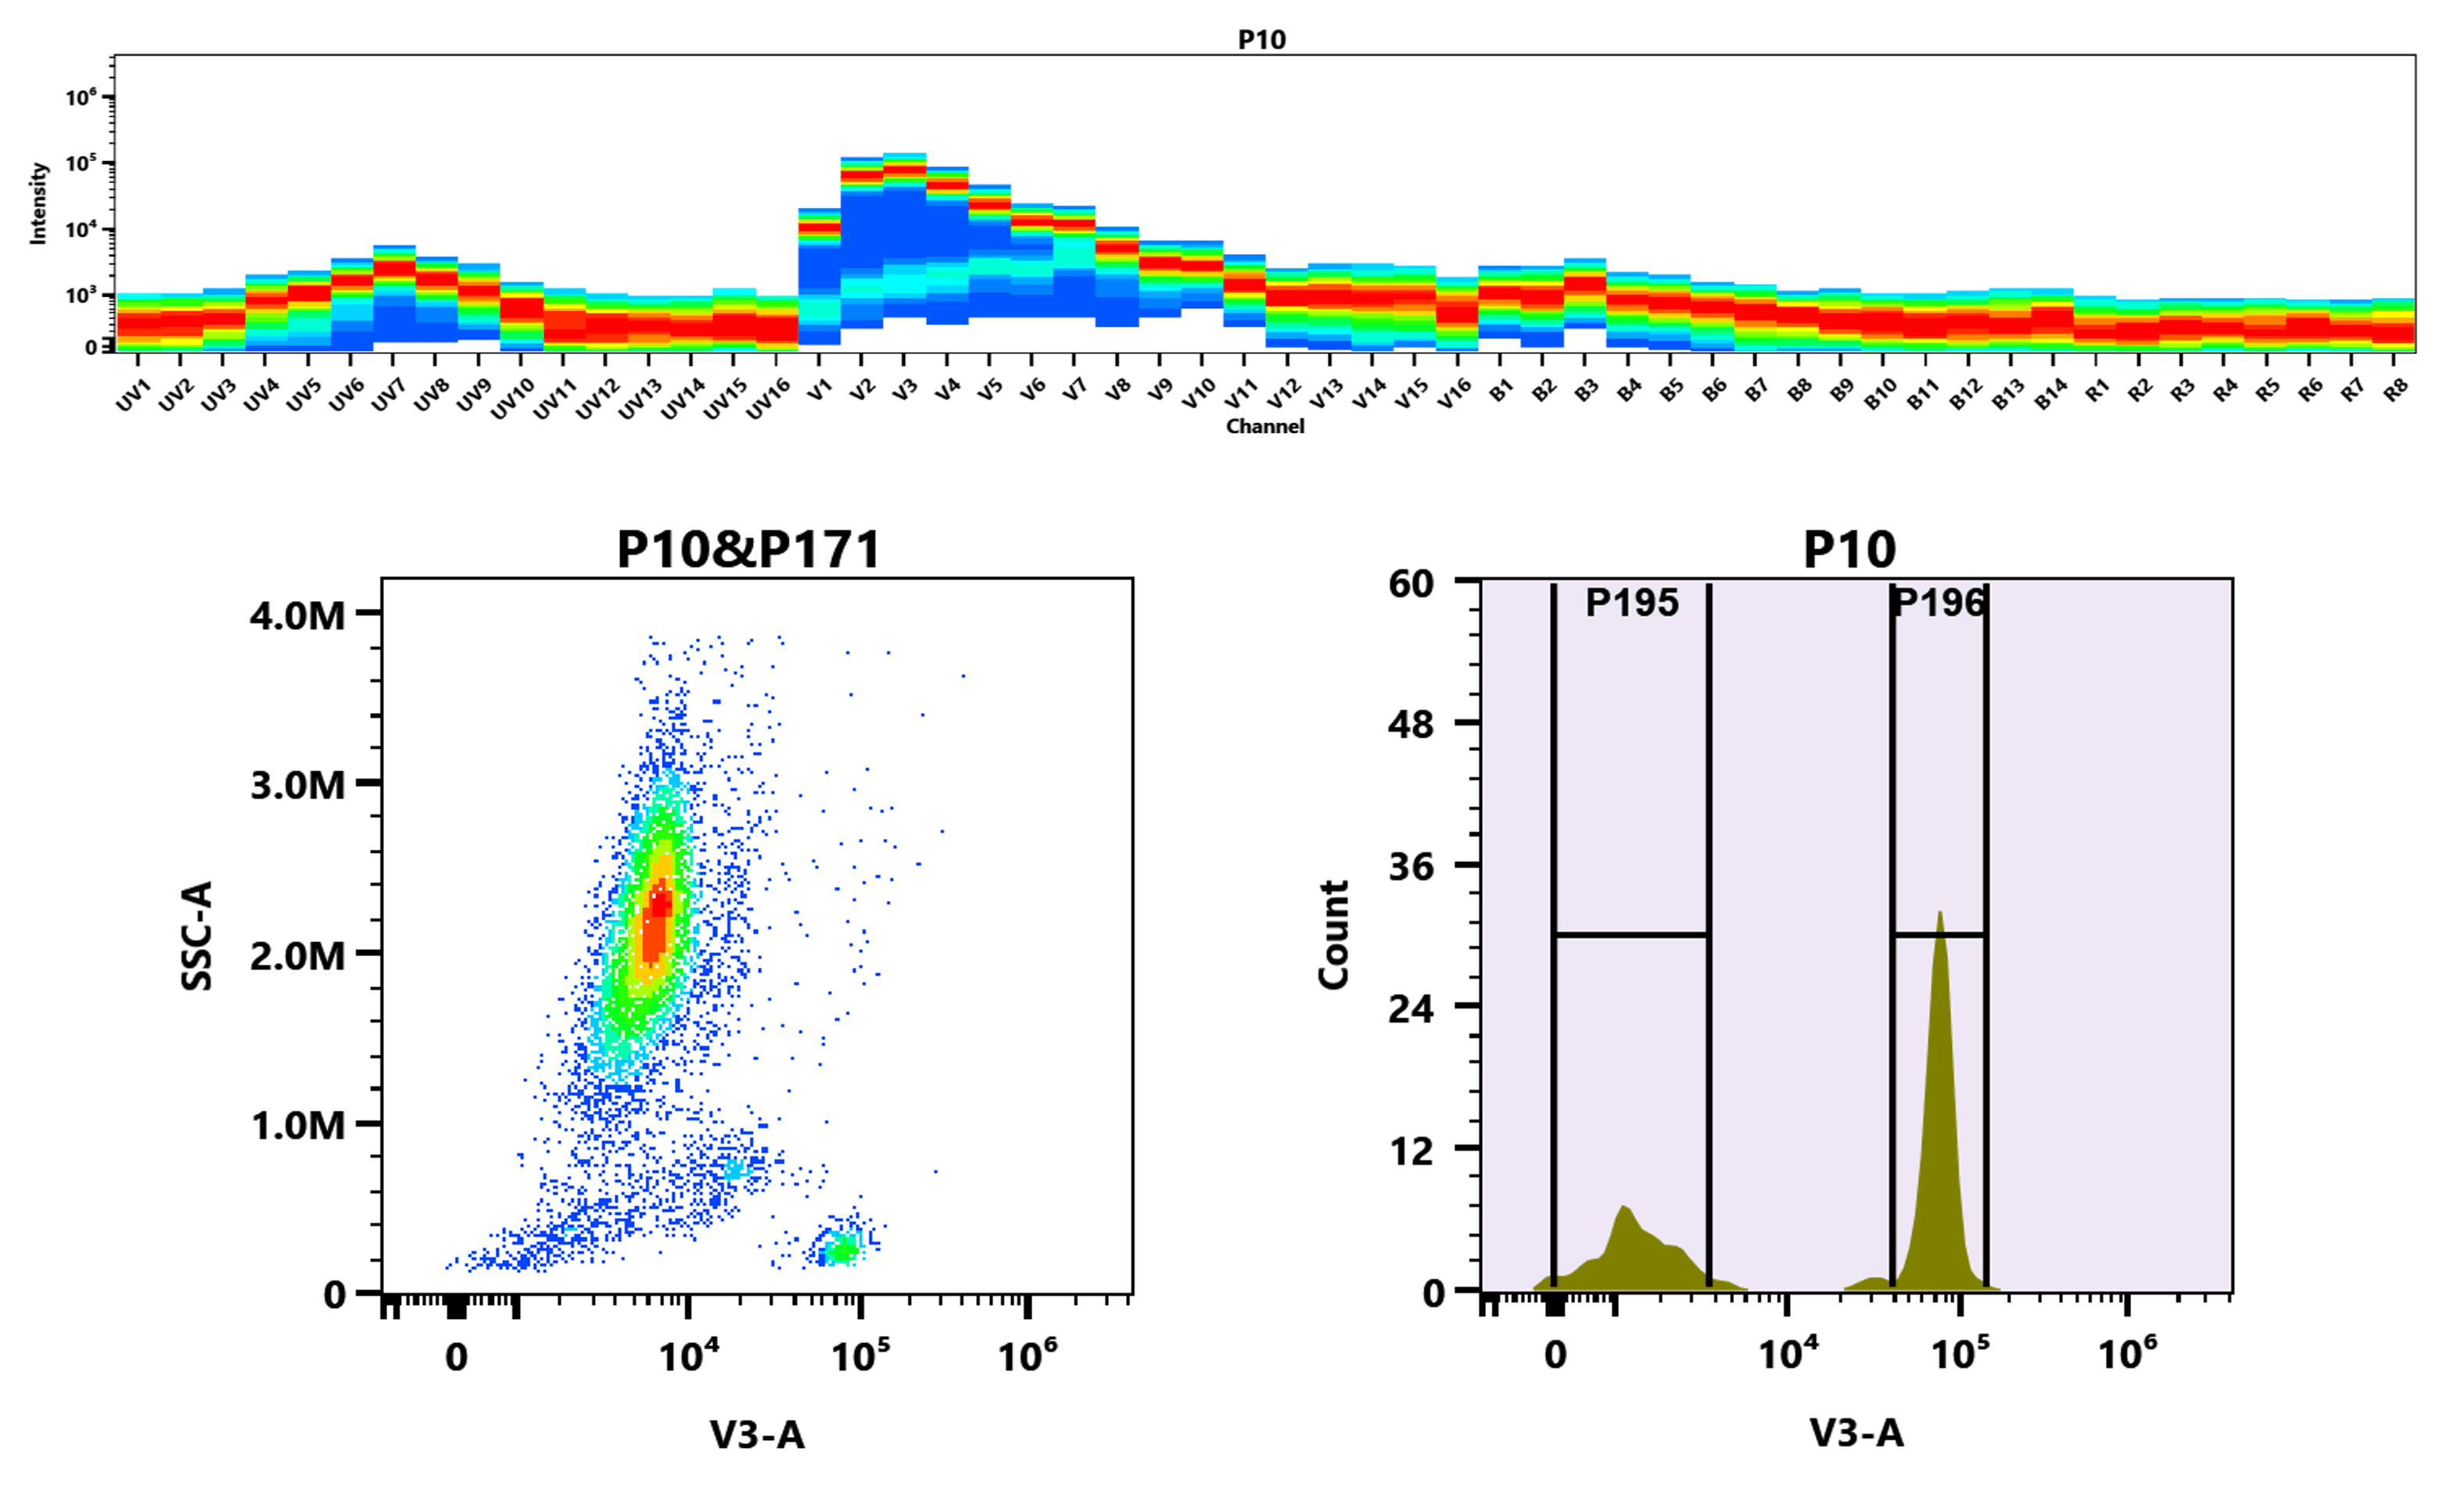 Top) The Spectral pattern was generated using a 4-laser spectral cytometer. Four spatially offset lasers (355 nm, 405 nm, 488 nm, and 640 nm) were used to create four distinct emission profiles, which, when combined, yielded the overall spectral signature. Bottom) Flow cytometry analysis of whole blood stained with mFluor™ Violet 450 anti-human CD4 *SK3* conjugate. The fluorescence signal was monitored using an Aurora spectral flow cytometer in the mFluor™ Violet 450 V3-A channel.